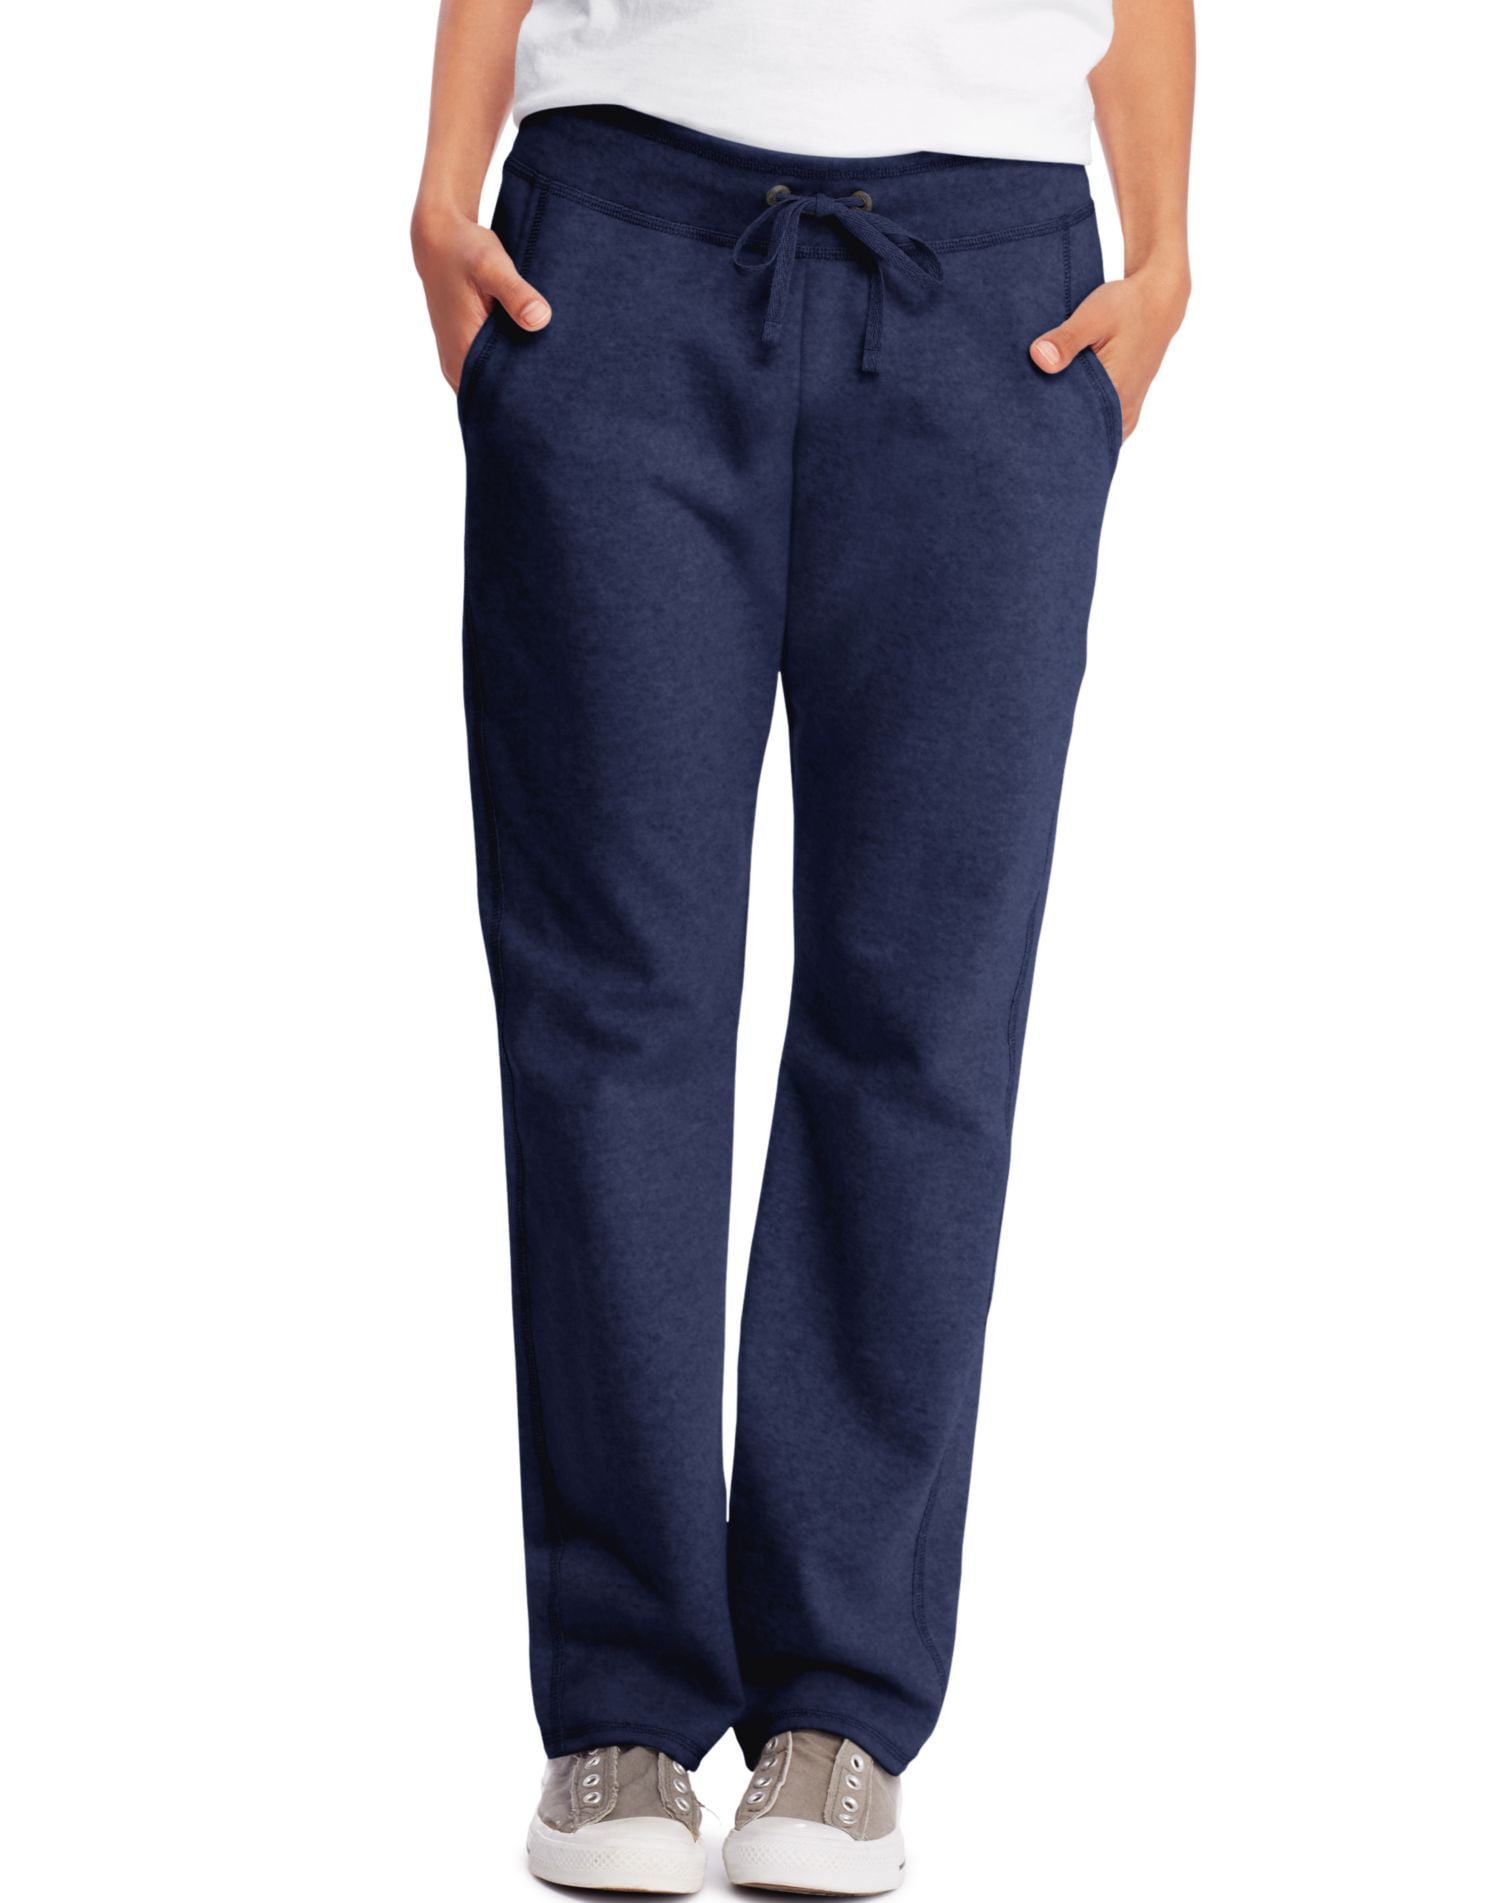 Details about   Hanes Women's French Terry Pant 